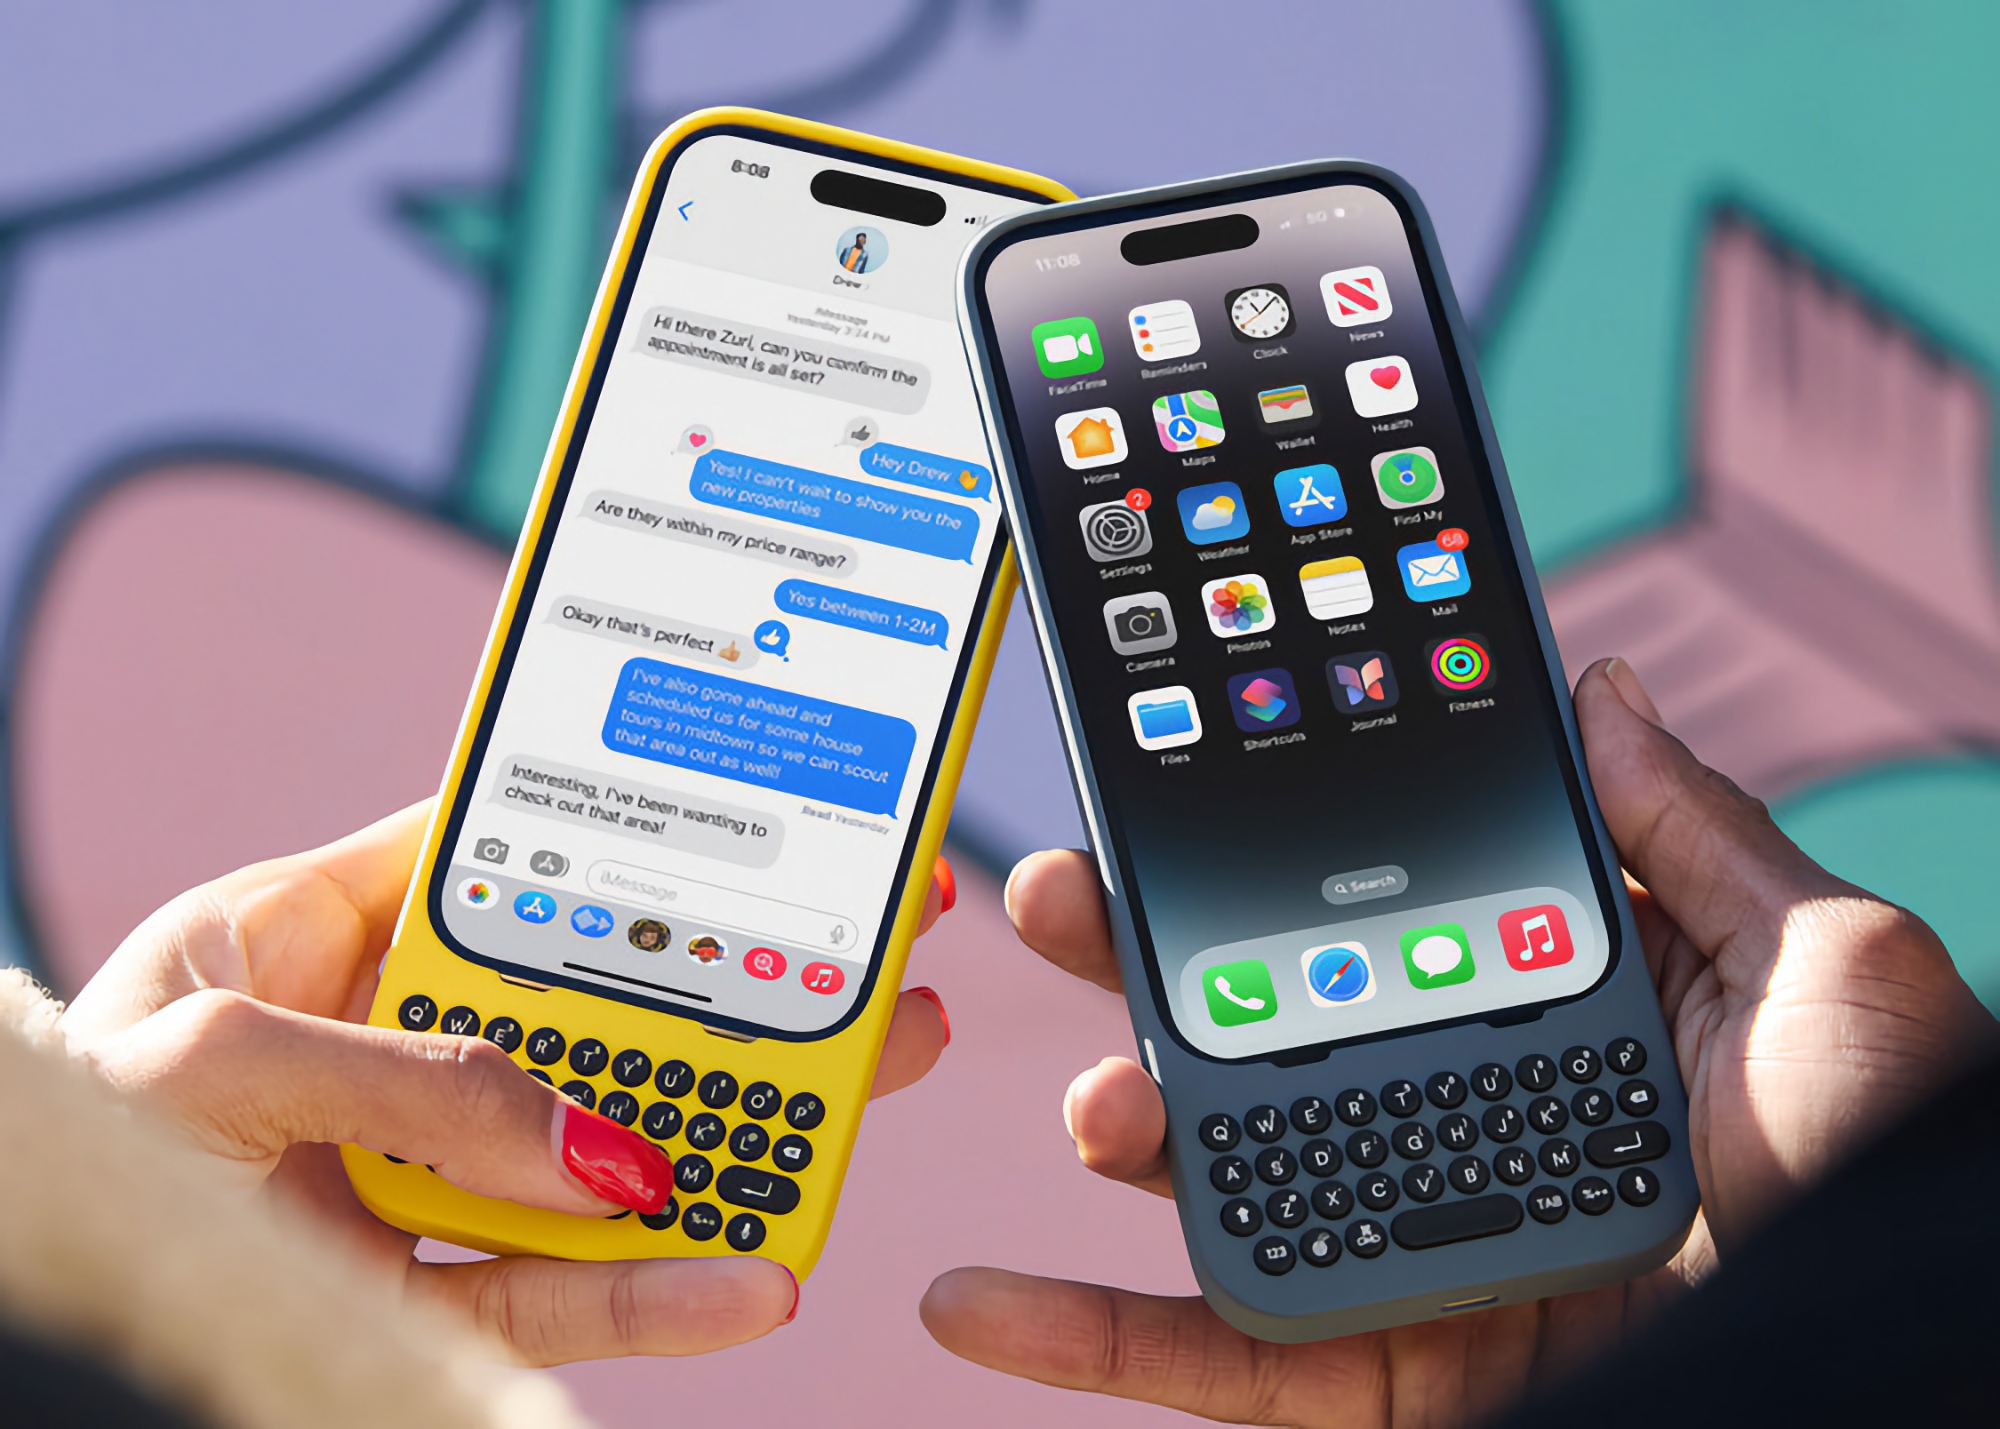 Missing the physical keyboard in your smartphone? Clicks has announced a QWERTY keyboard case for iPhone 14 Pro and iPhone 15 Pro starting at $139